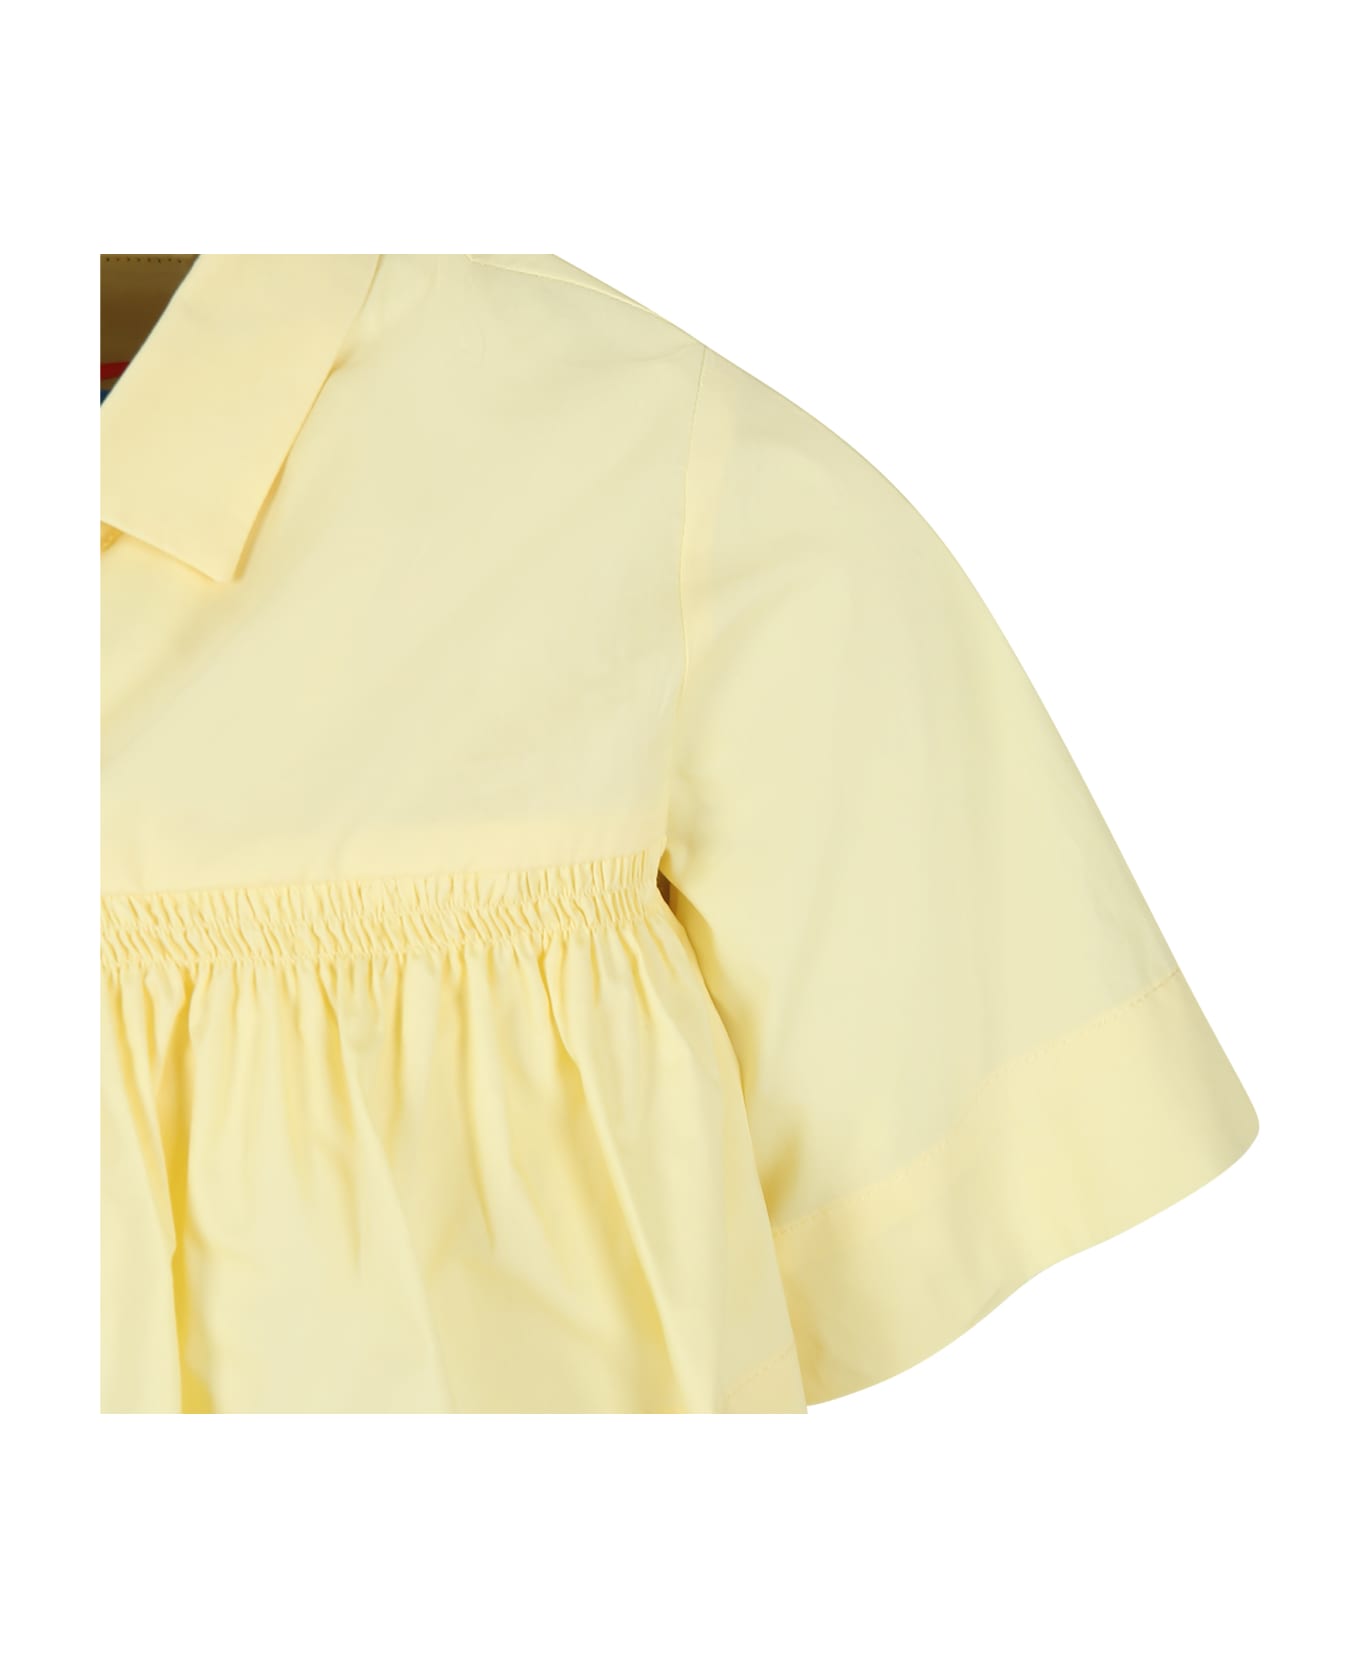 MSGM Yellow Crop Shirt For Girl With Logo - Yellow